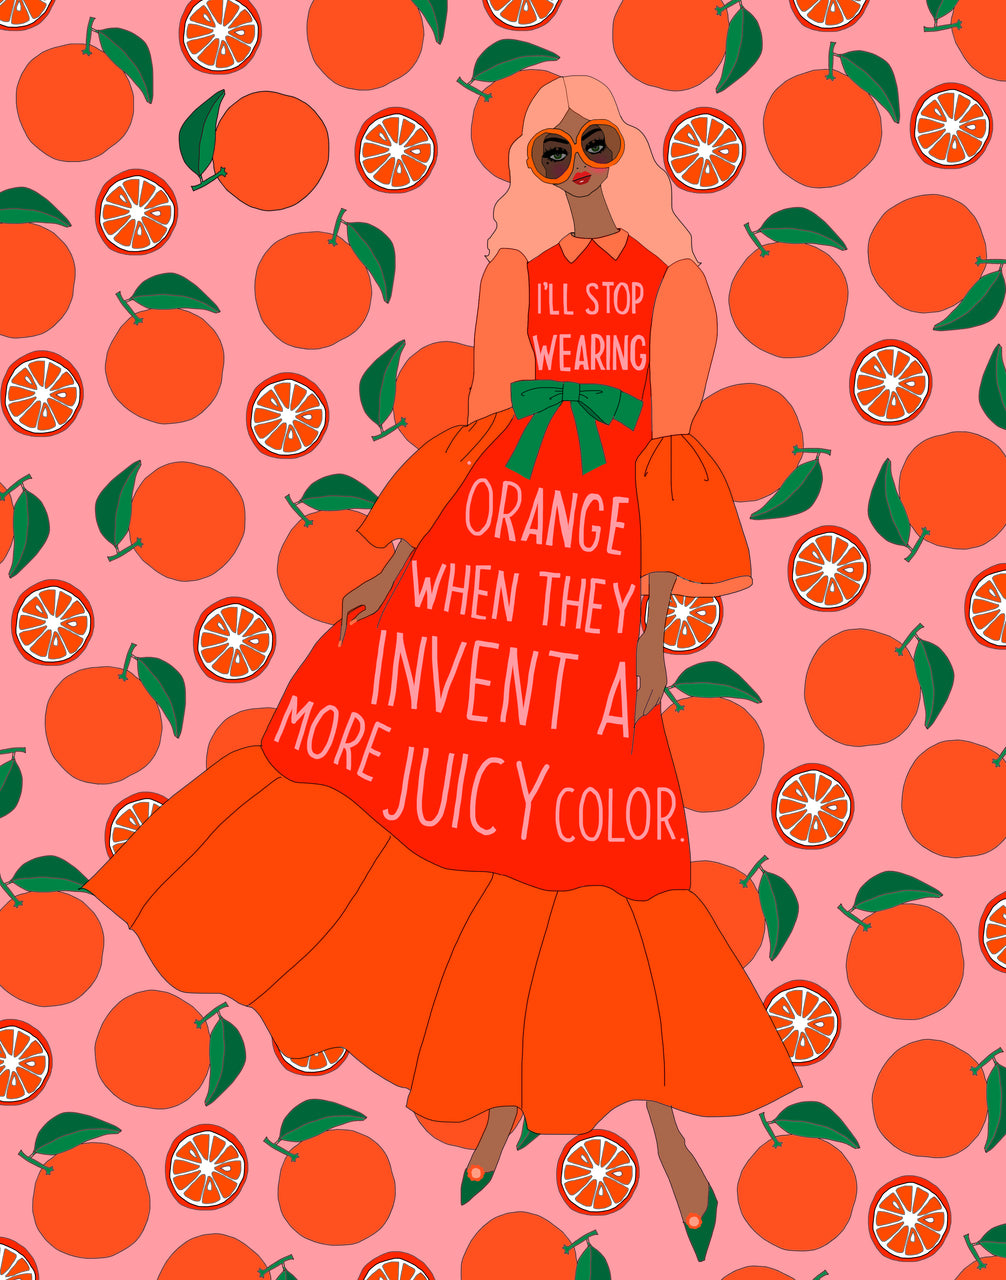 I'll Stop Wearing Orange When They Invent a More Juicy Color.